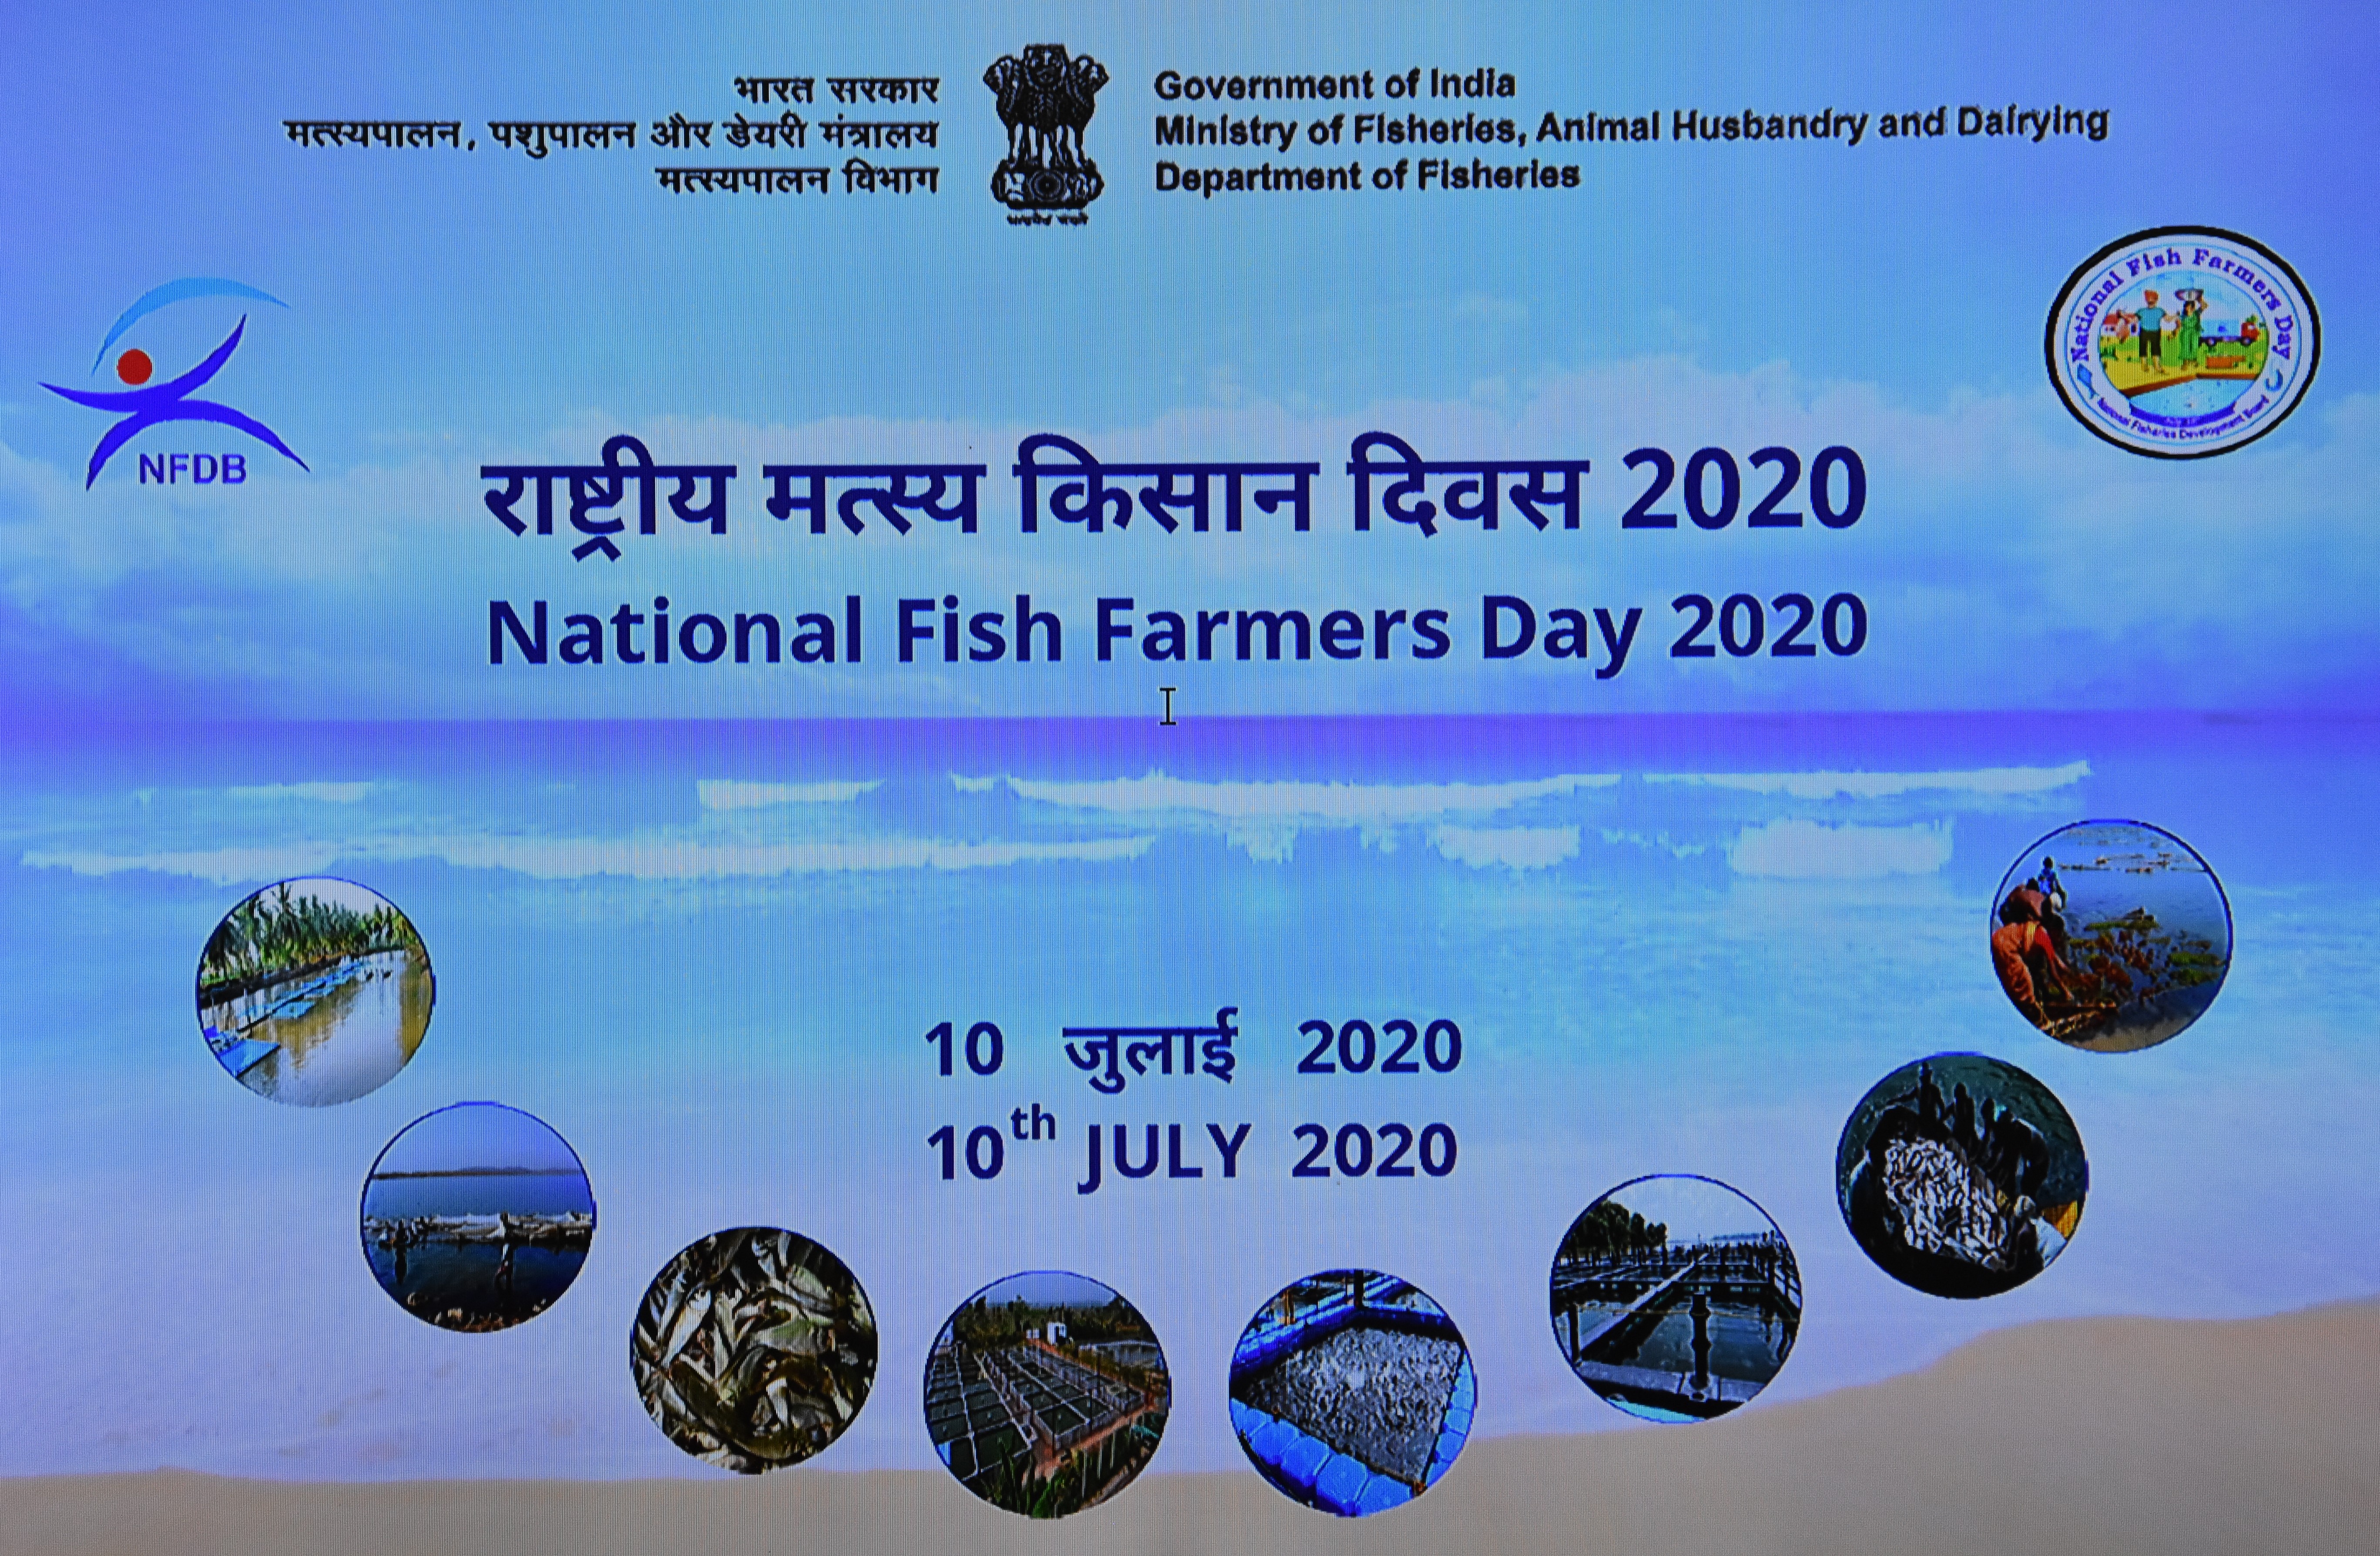 Celebration of National Fish Farmers Day on 10.07.2020